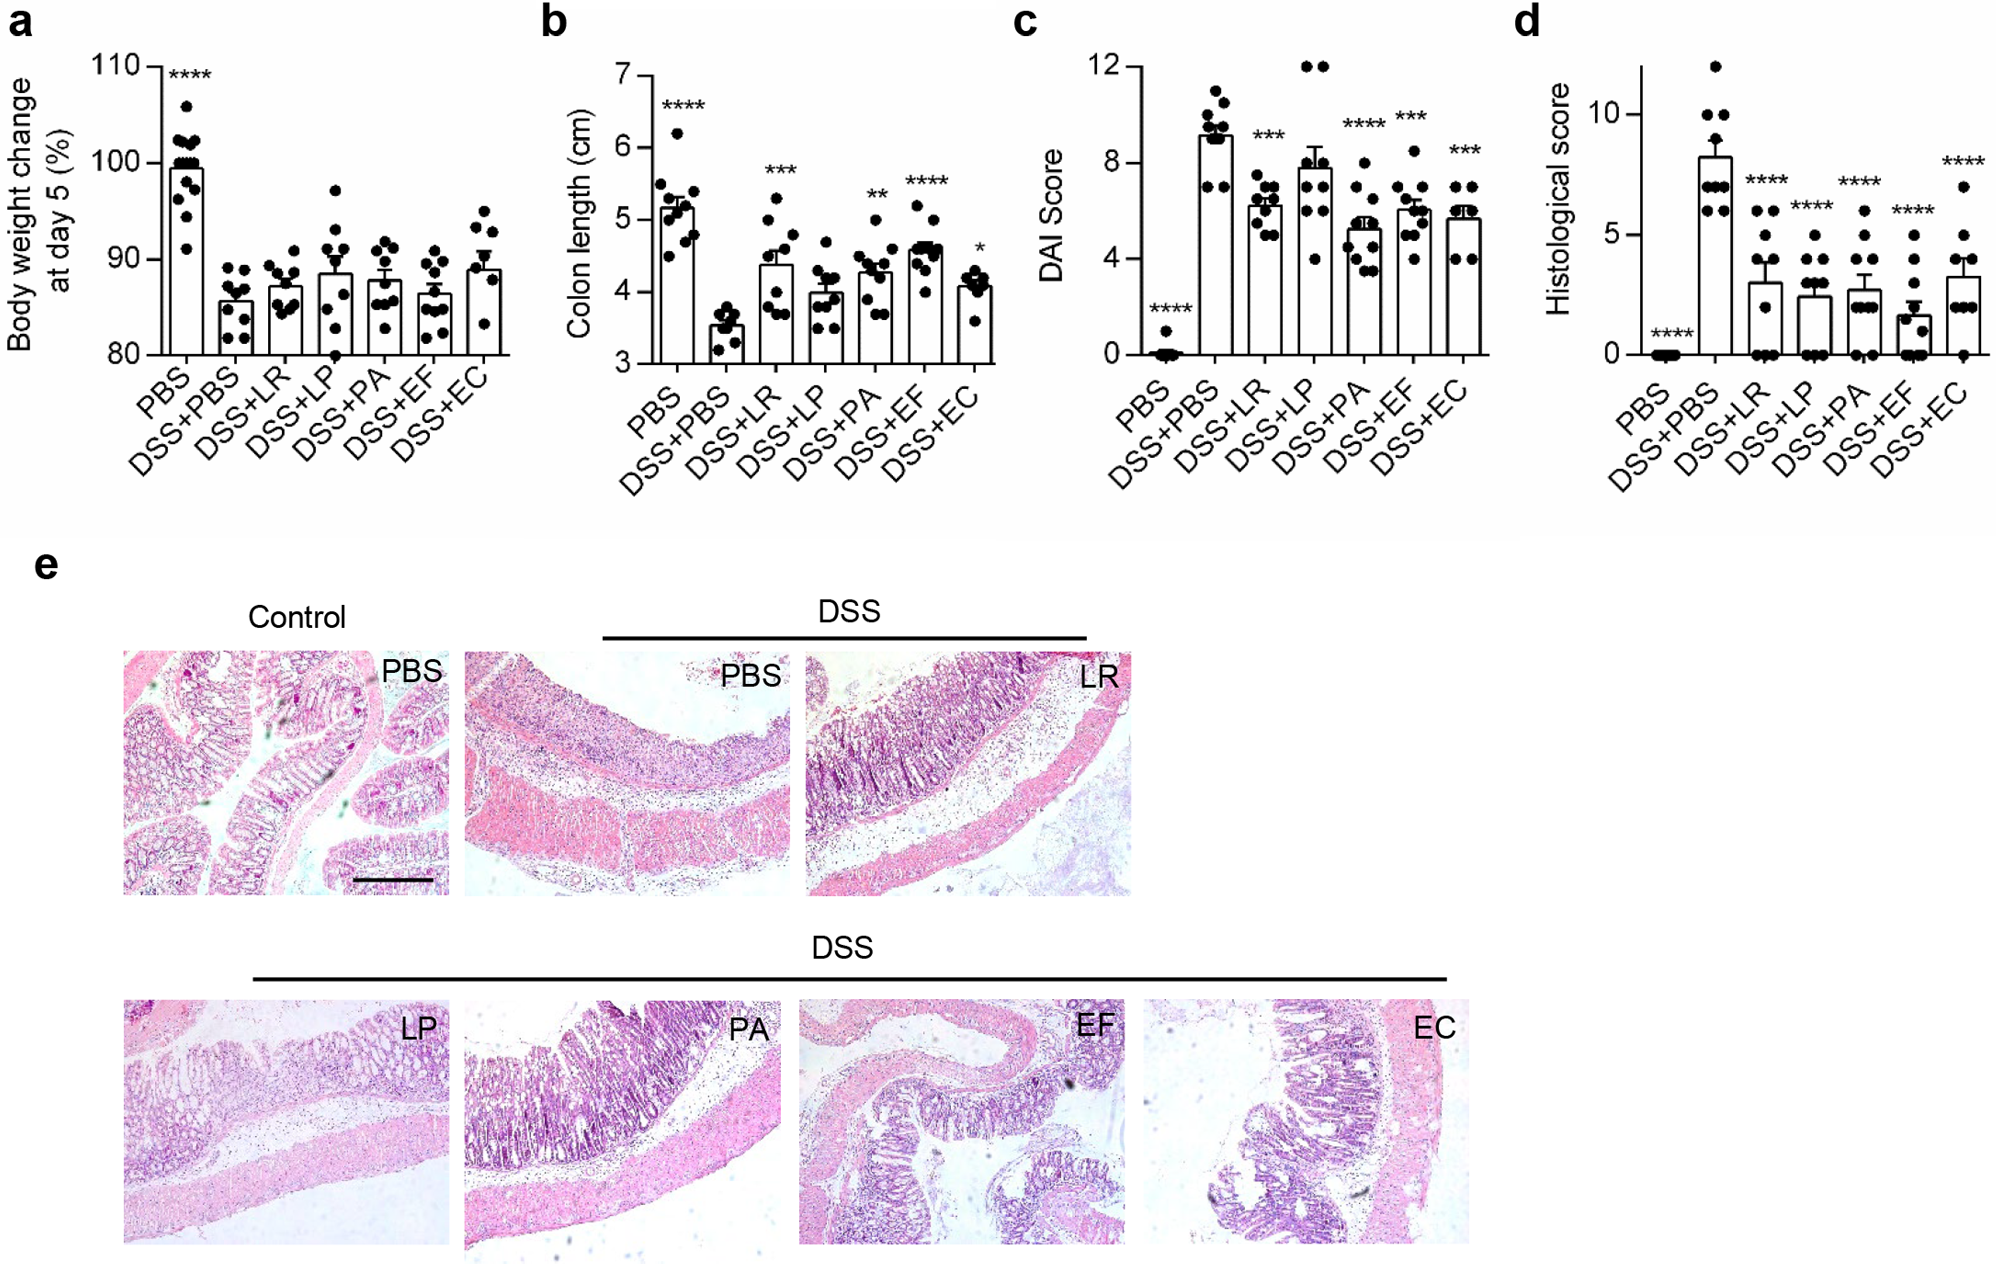 Human-derived bacterial strains mitigate colitis via modulating gut microbiota and repairing intestinal barrier function in mice